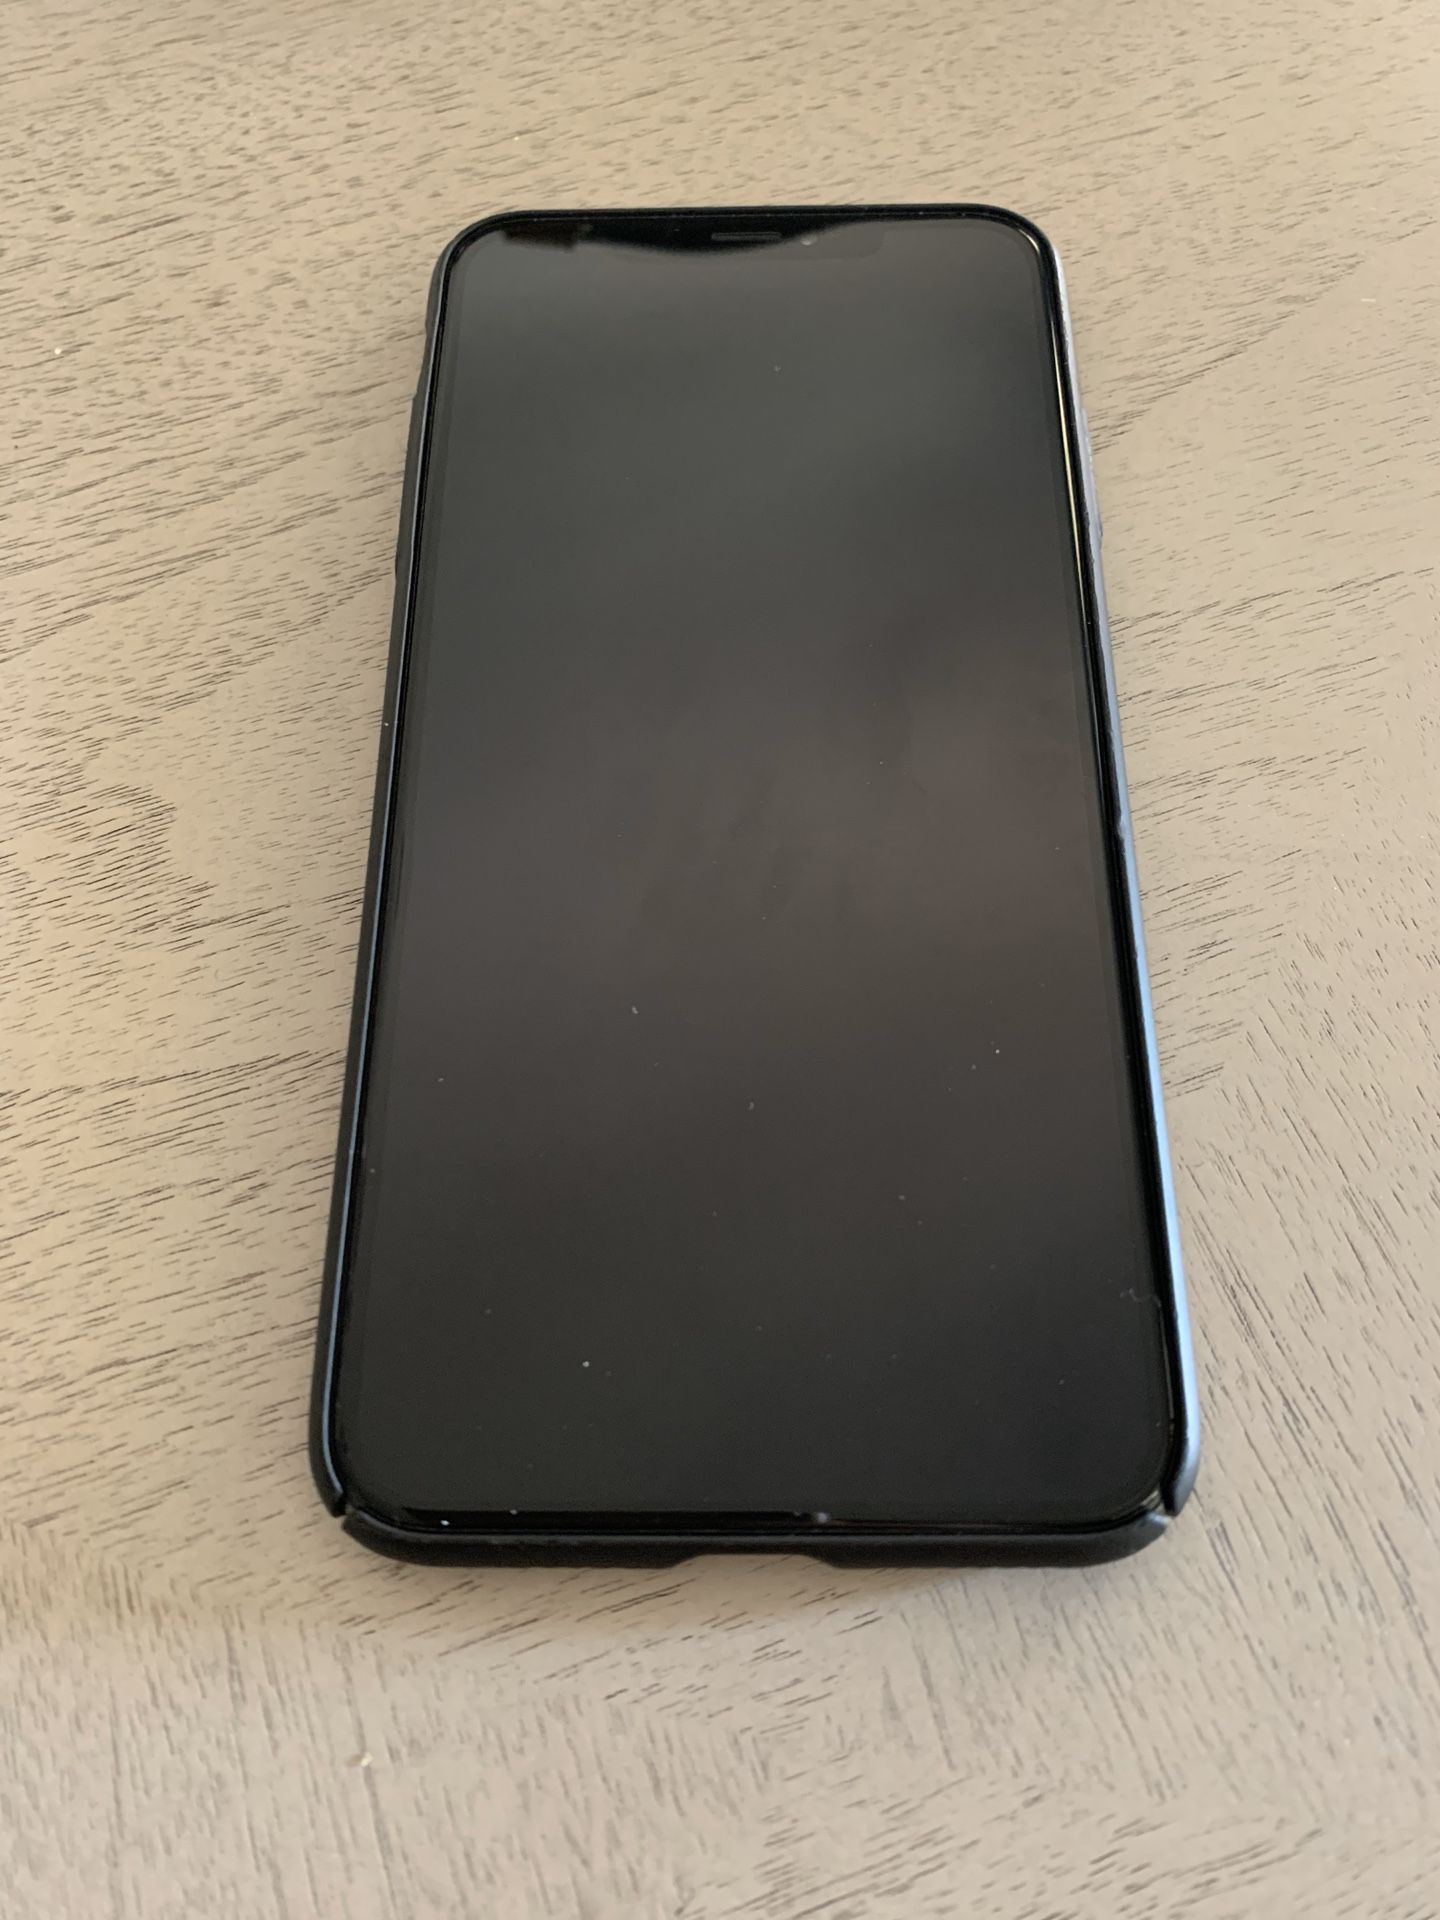 iphone xs max for sale! 64gb unlocked iphone.